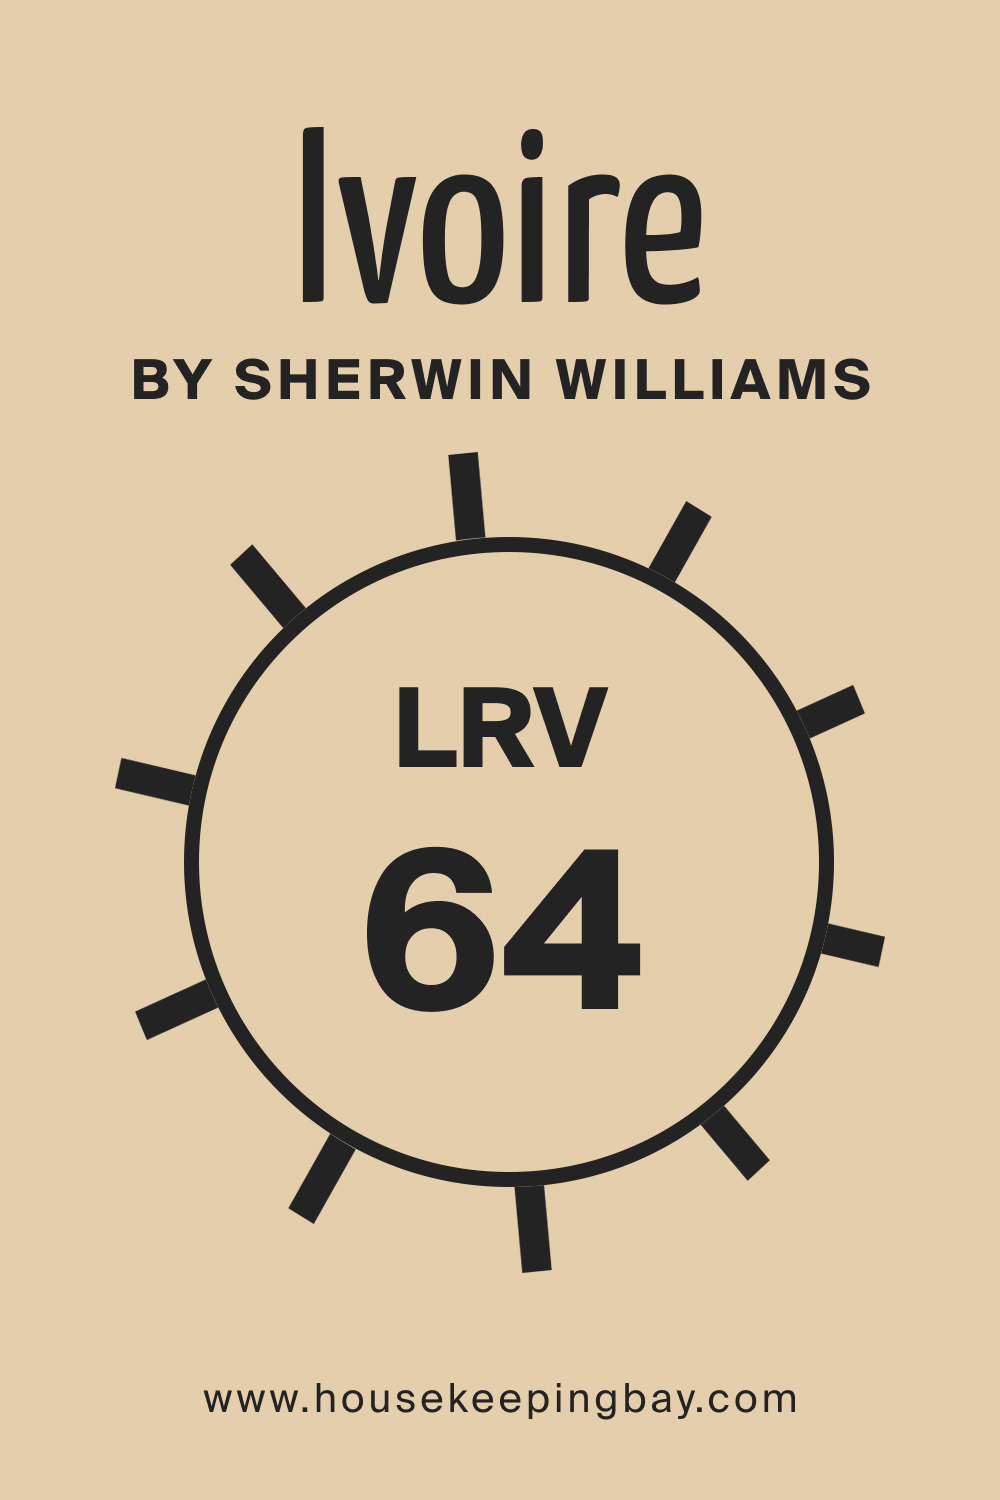 SW Ivoire by Sherwin Williams. LRV – 64